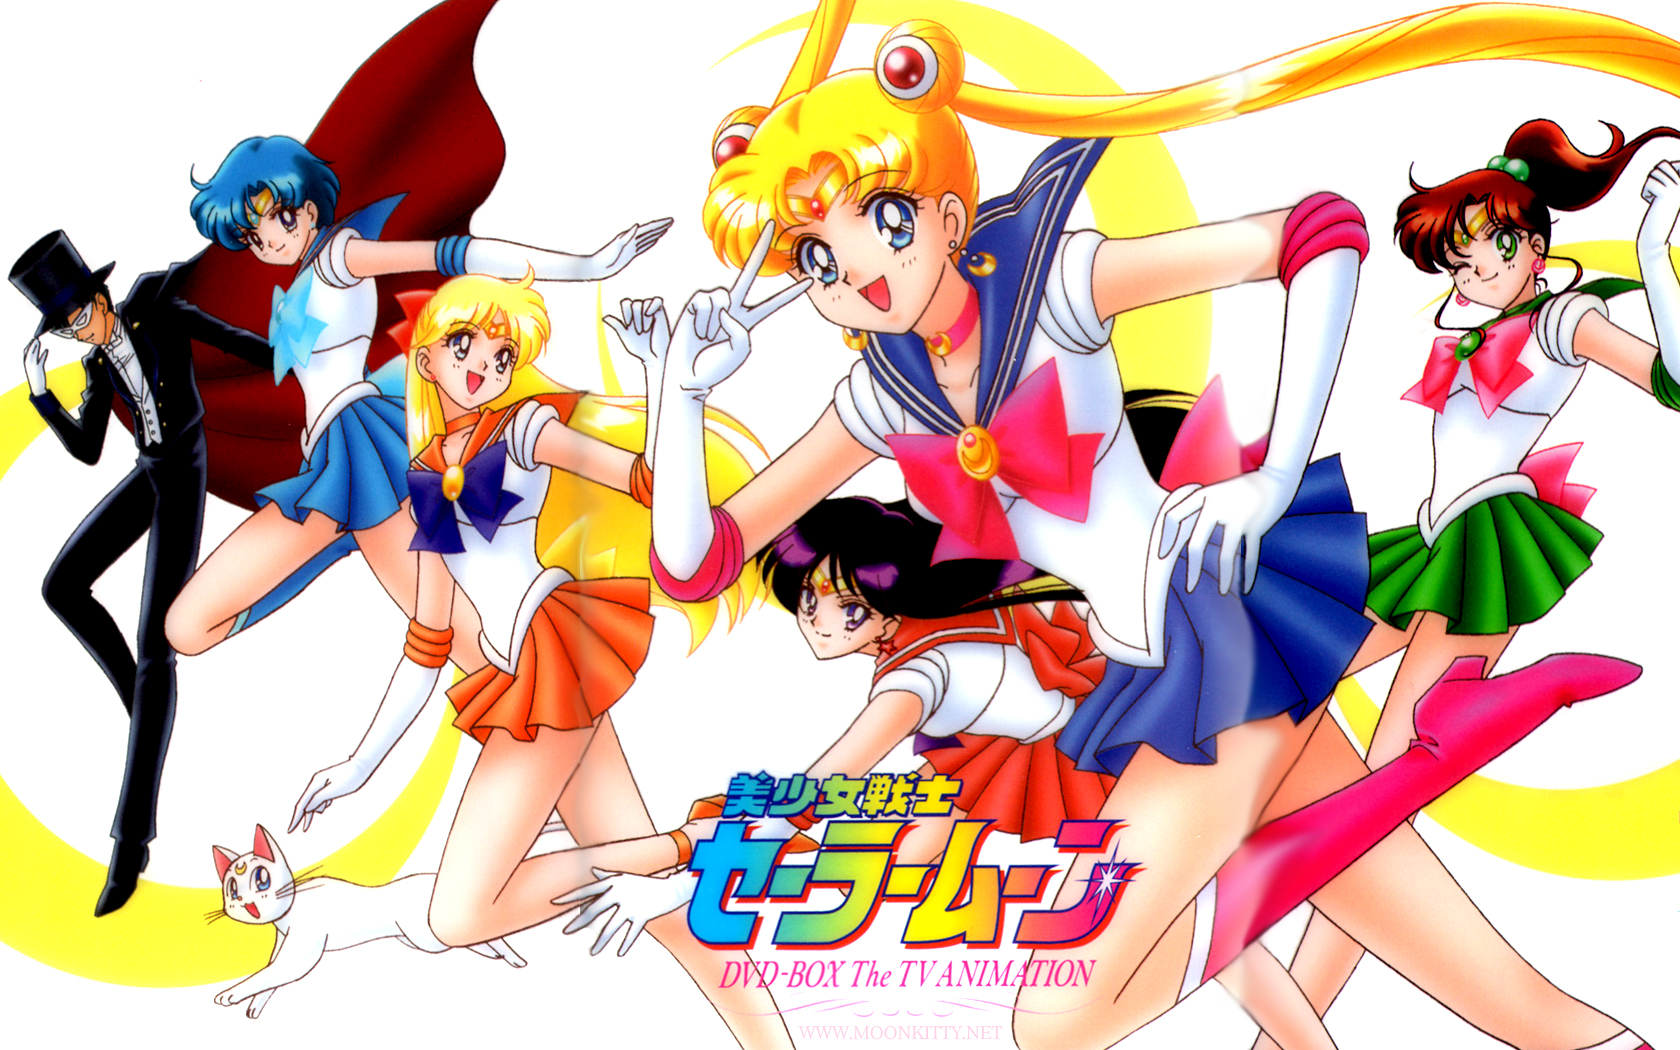 moonkitty.net: Sailor Moon Wallpapers Widescreen Page 12